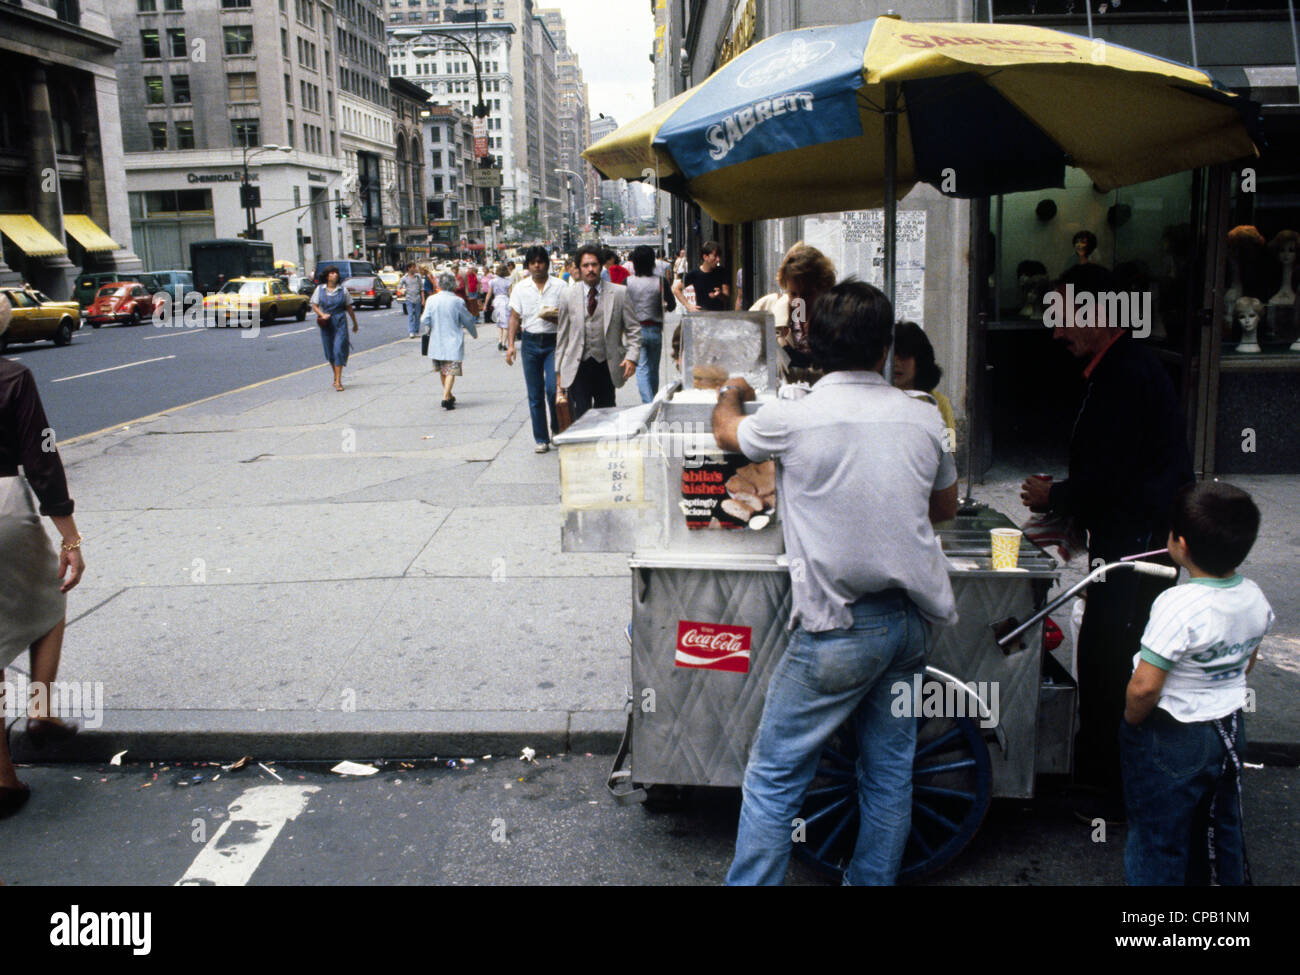 Hamburger sellers, streets of New York Downtown, August 1981. Stock Photo